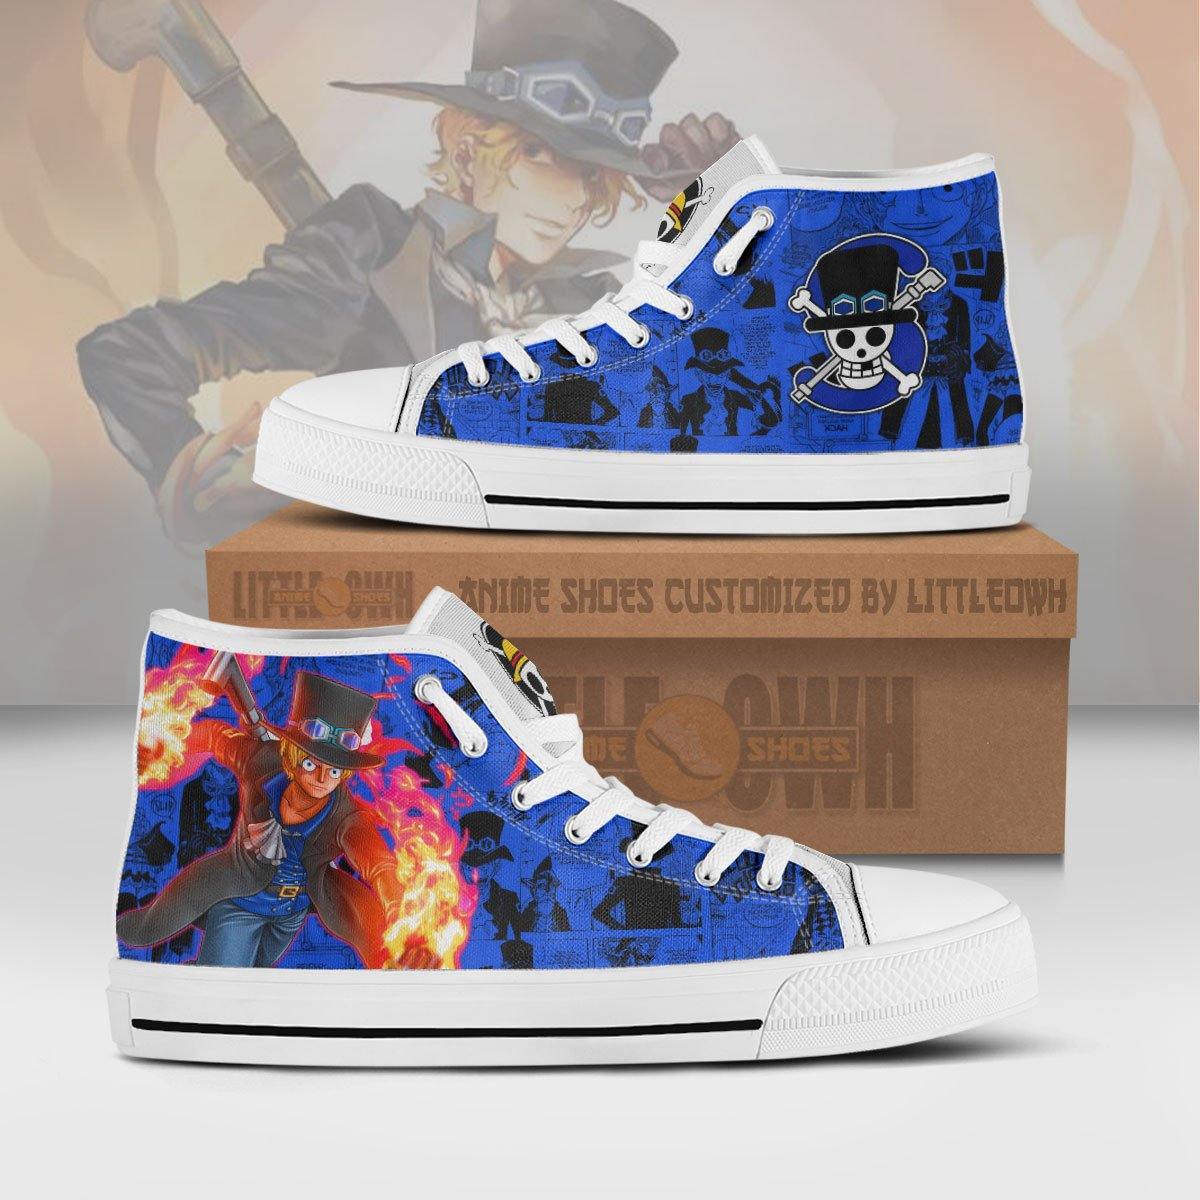 Sabo High Top Shoes Custom One Piece Anime Canvas Sneakers